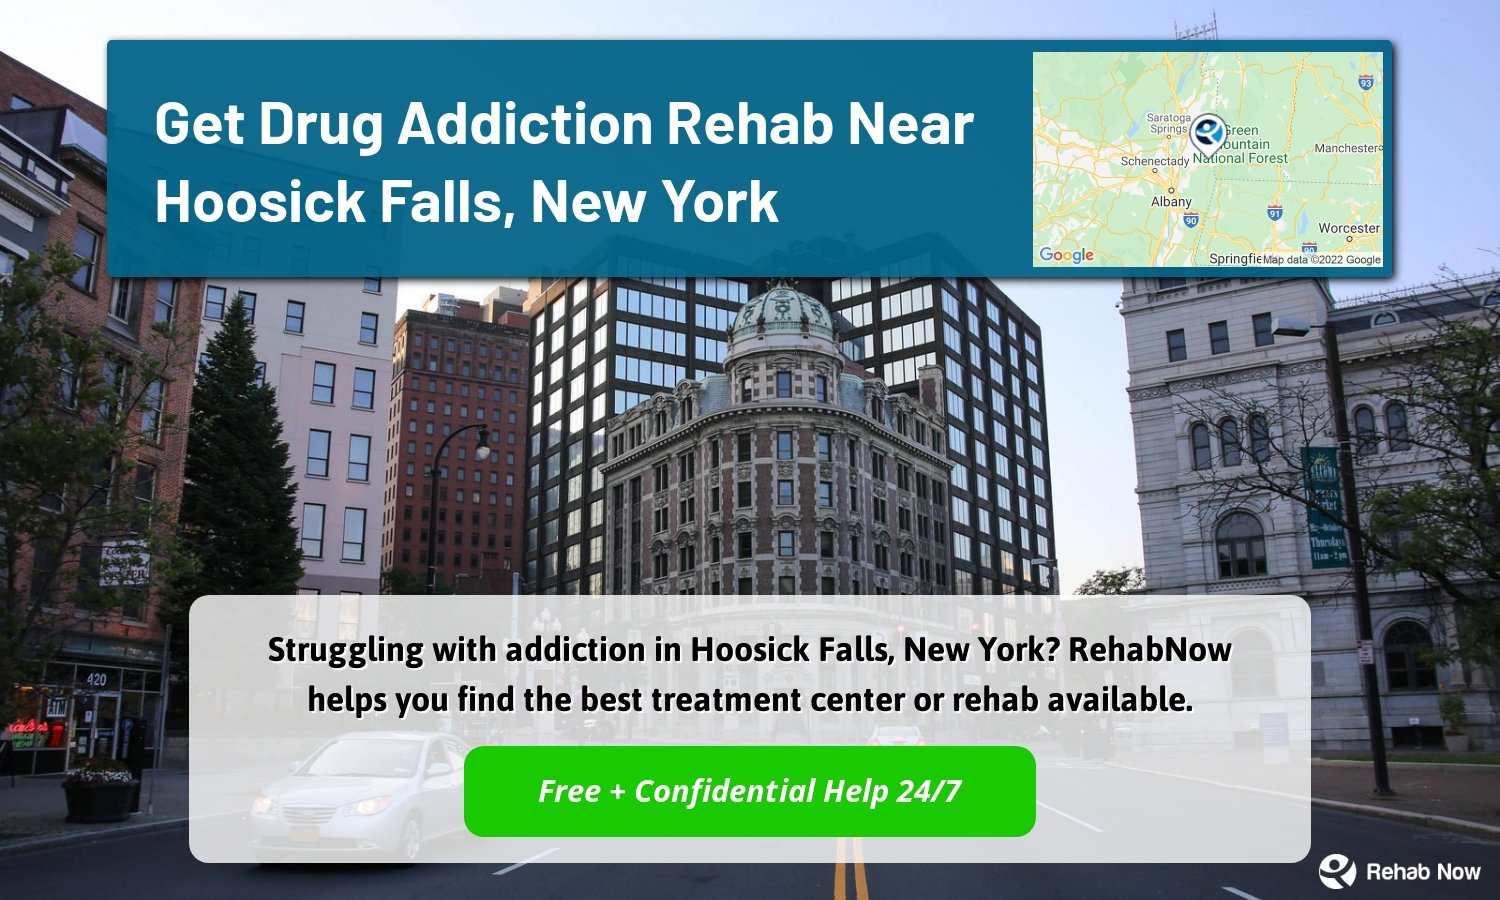 Struggling with addiction in Hoosick Falls, New York? RehabNow helps you find the best treatment center or rehab available.